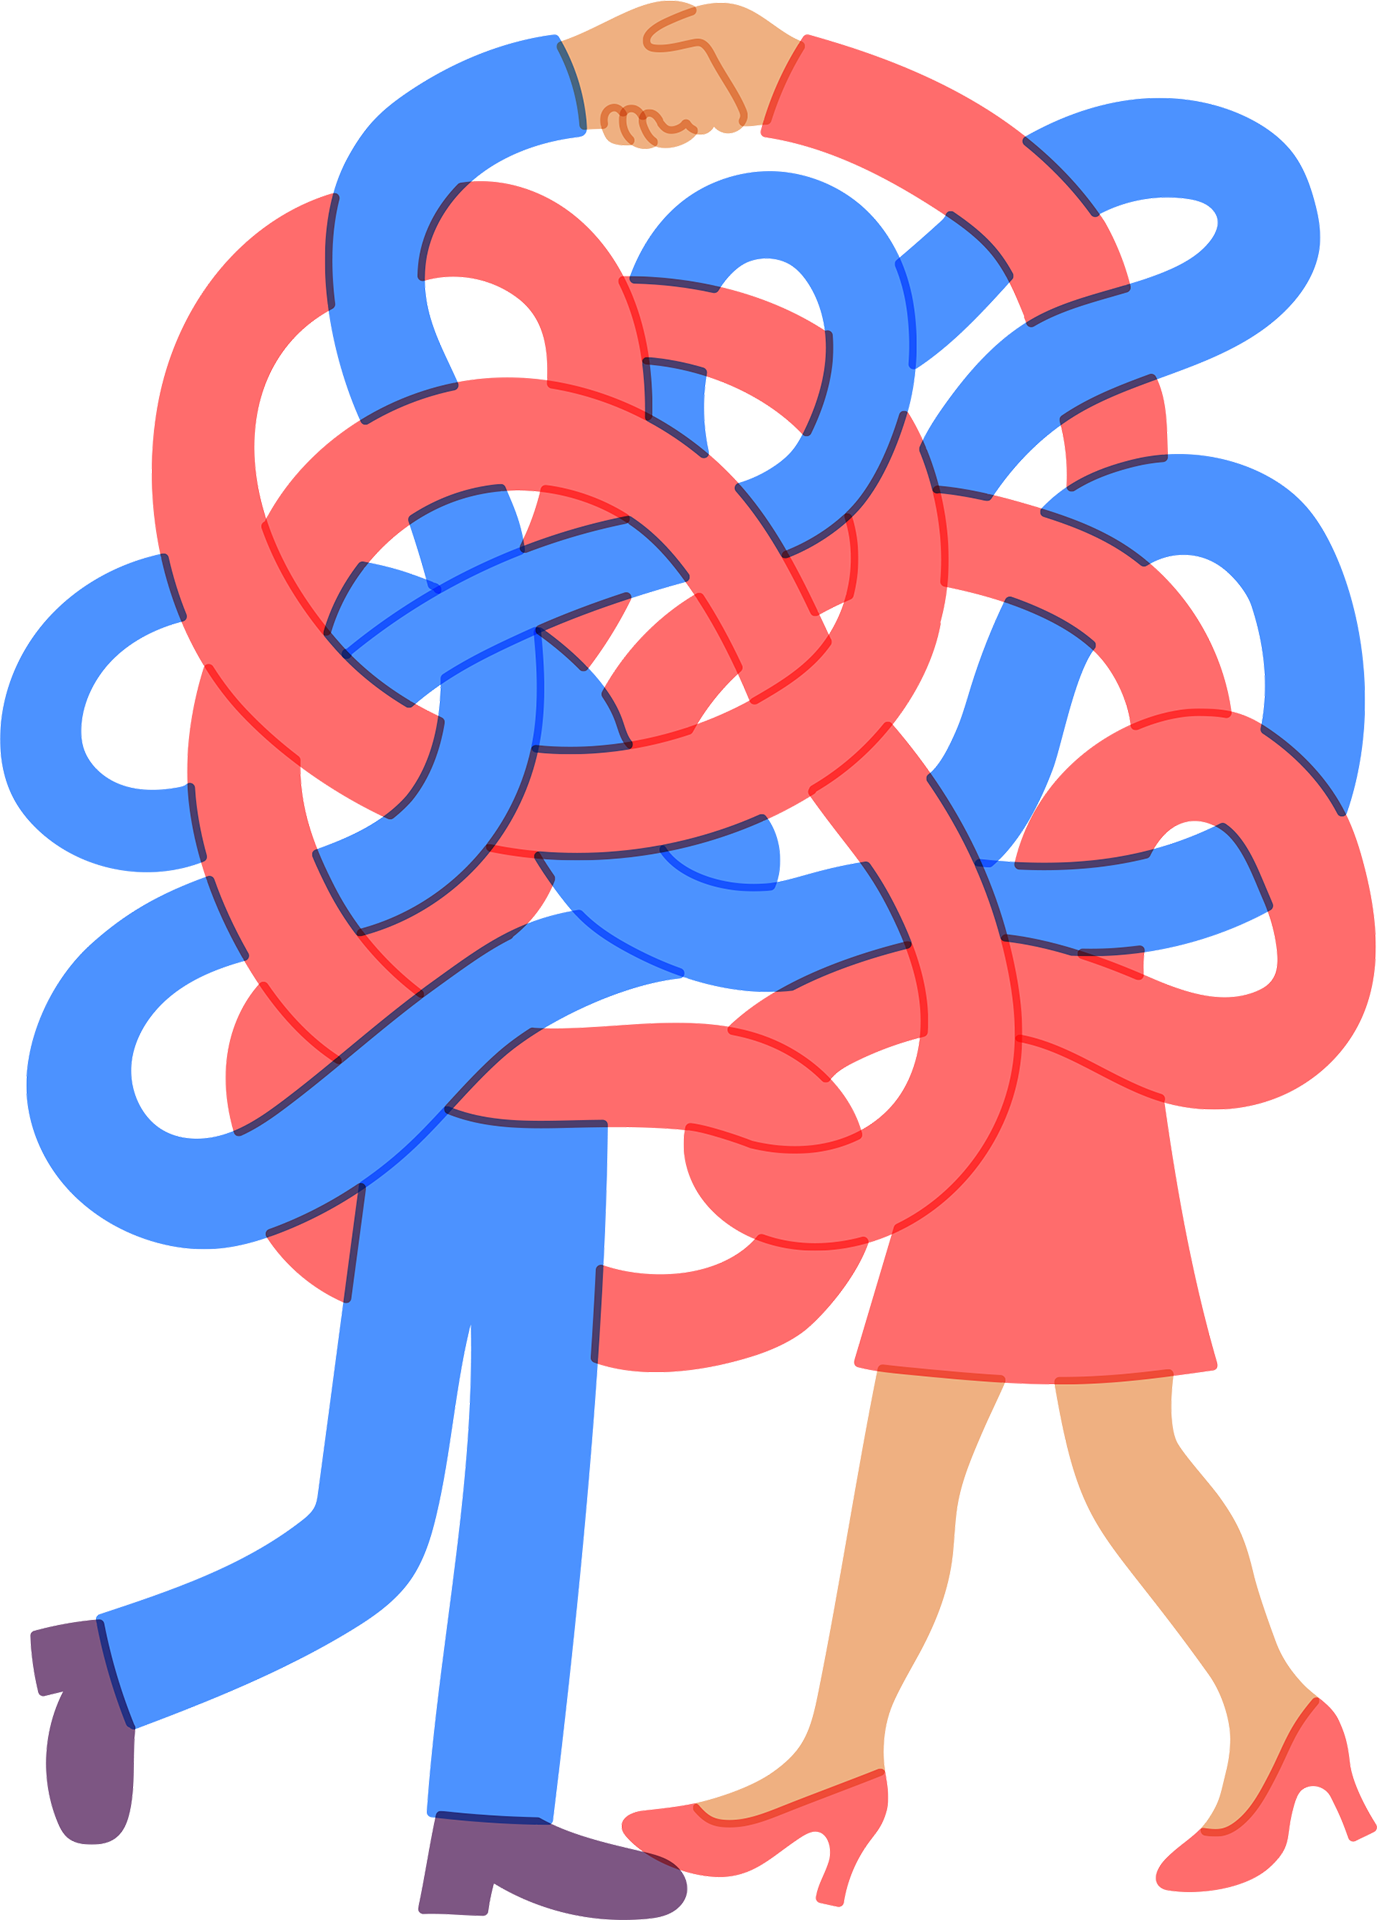 illustration of a couple paired in blues and reds with tangled limbs tussling cartoonishly. At top center, hands clasps together in a handshaking gesture.